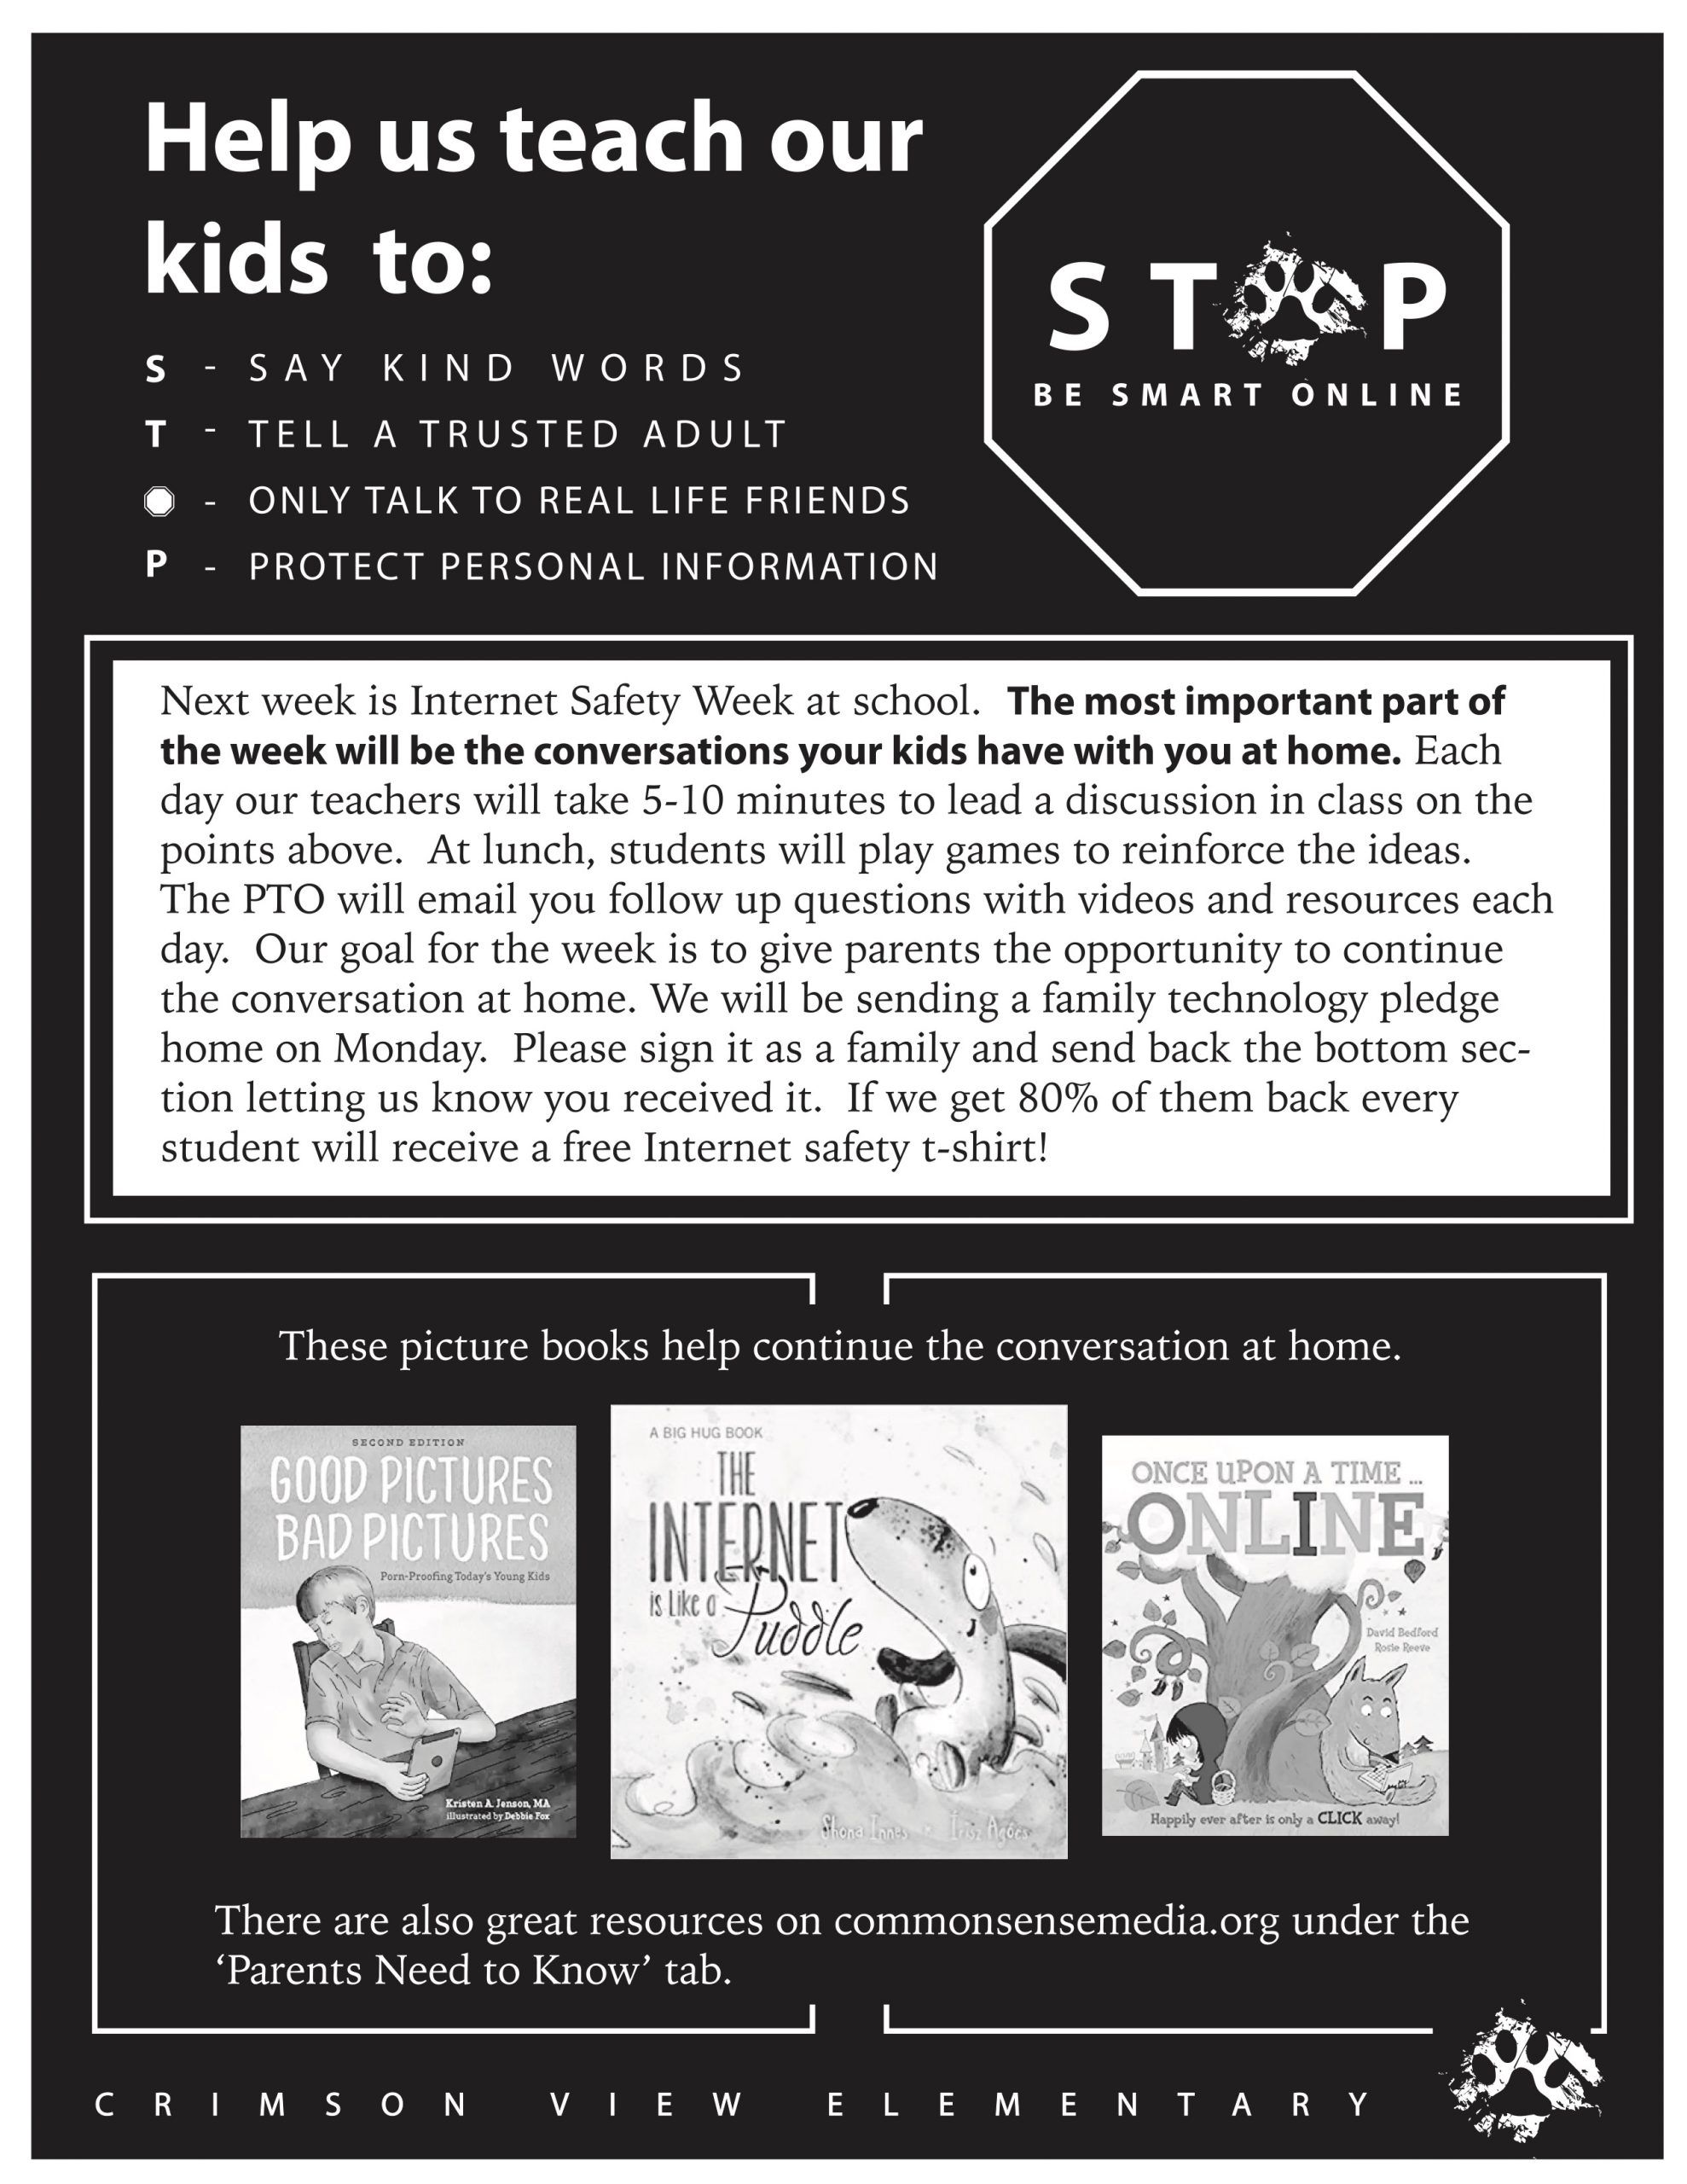 Help us teach our kids to STOP poster